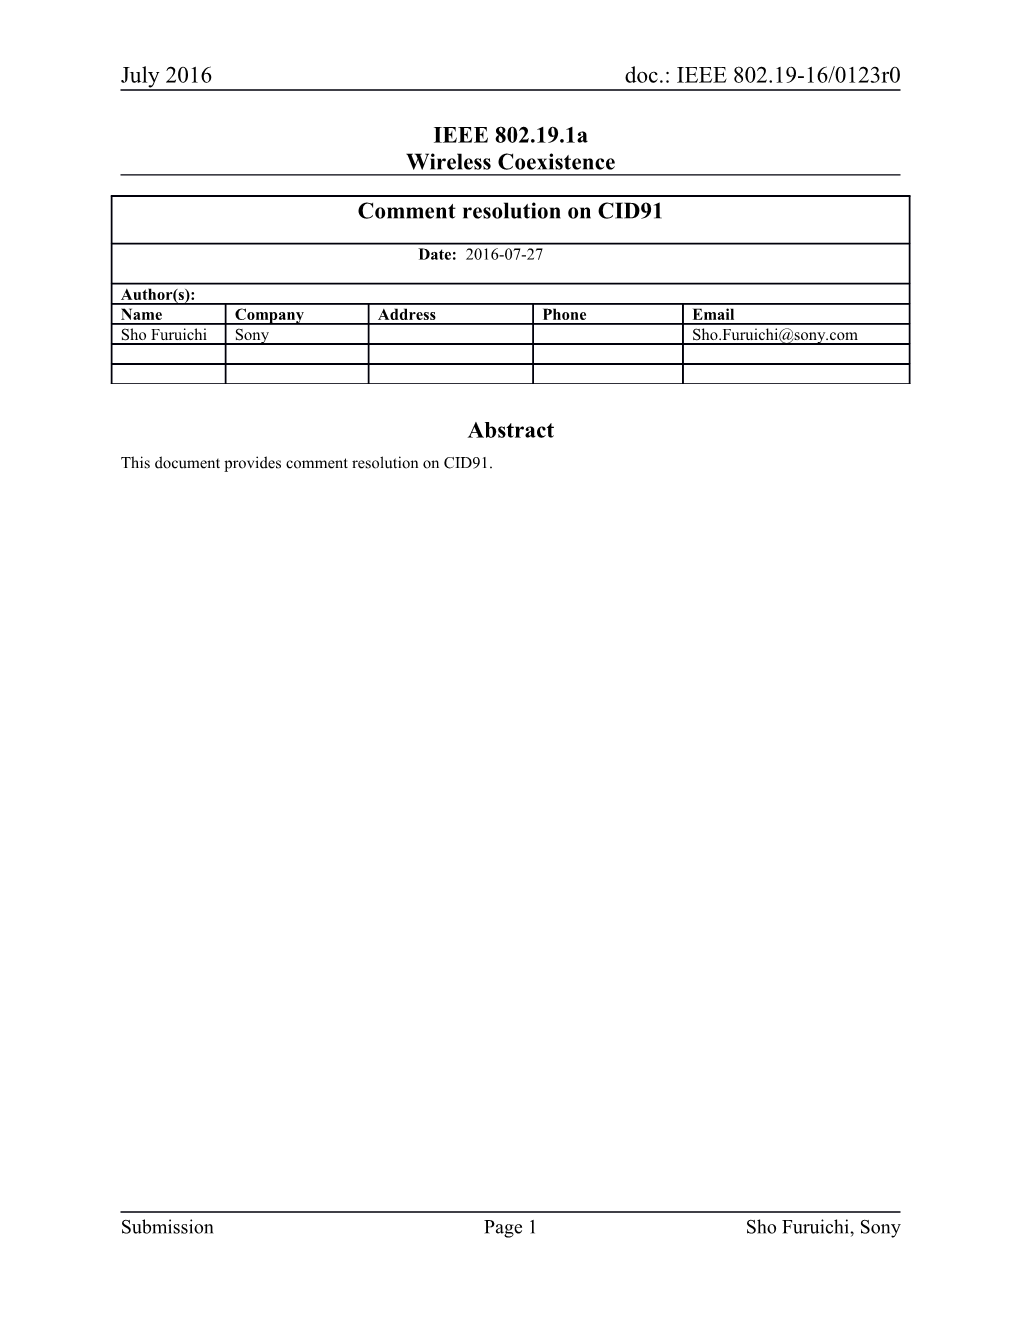 This Document Provides Comment Resolution Oncid91